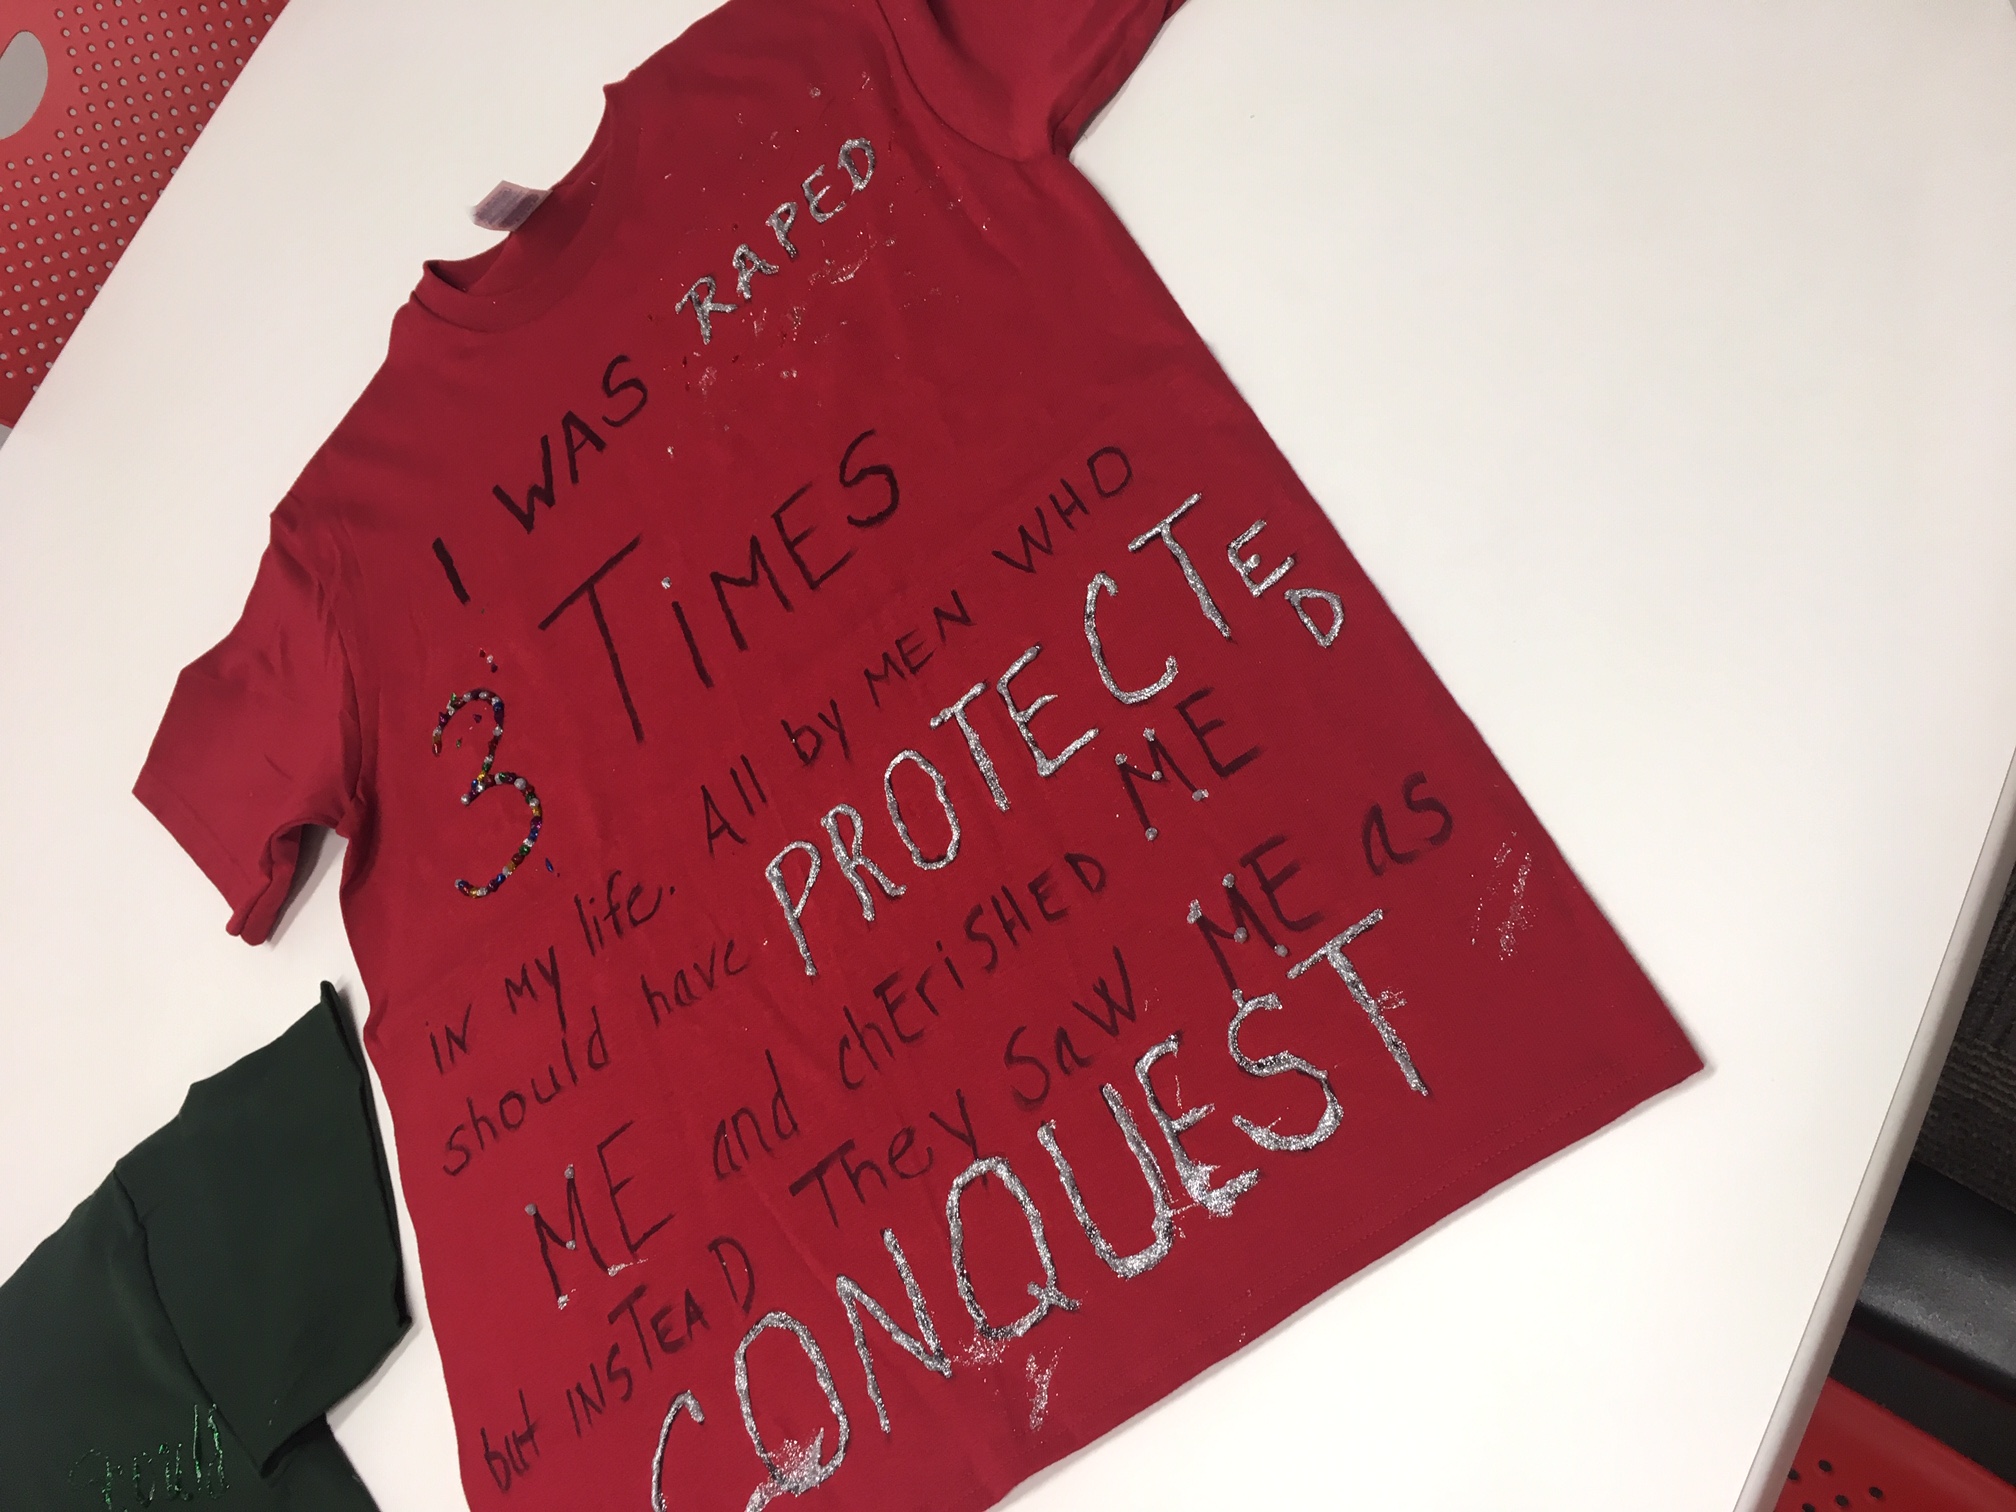 Photo of a t-shirt created by a survivor for the Clothesline Project on campus.